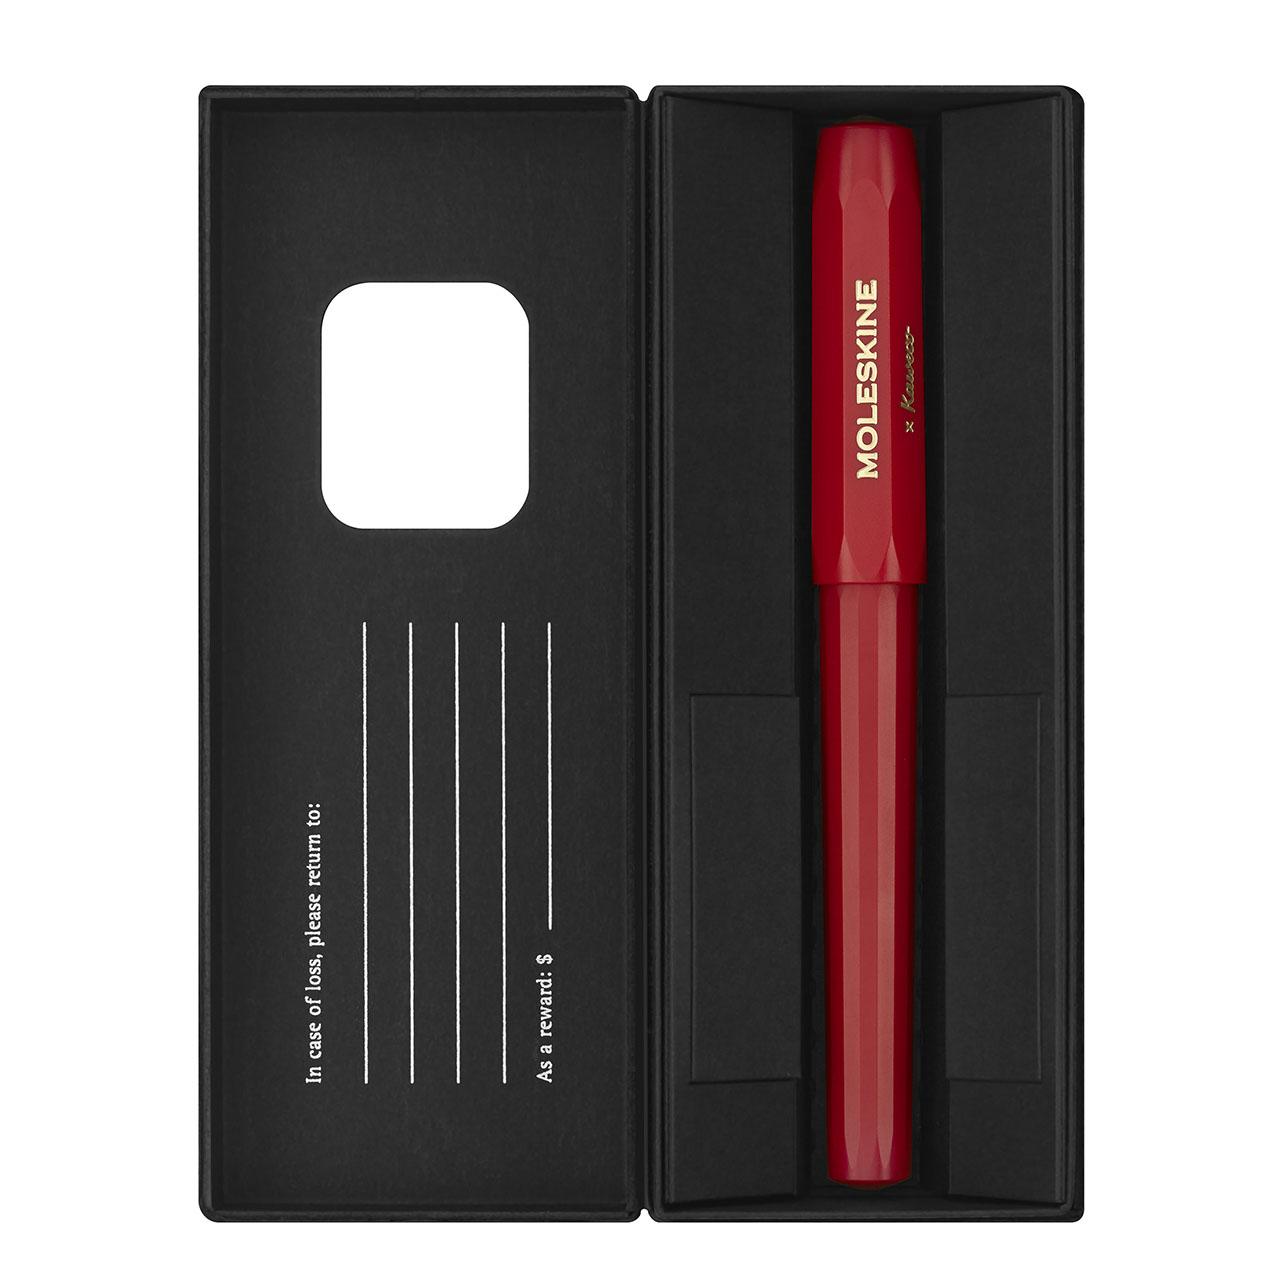 Kaweco Collection Fountain Pen Red